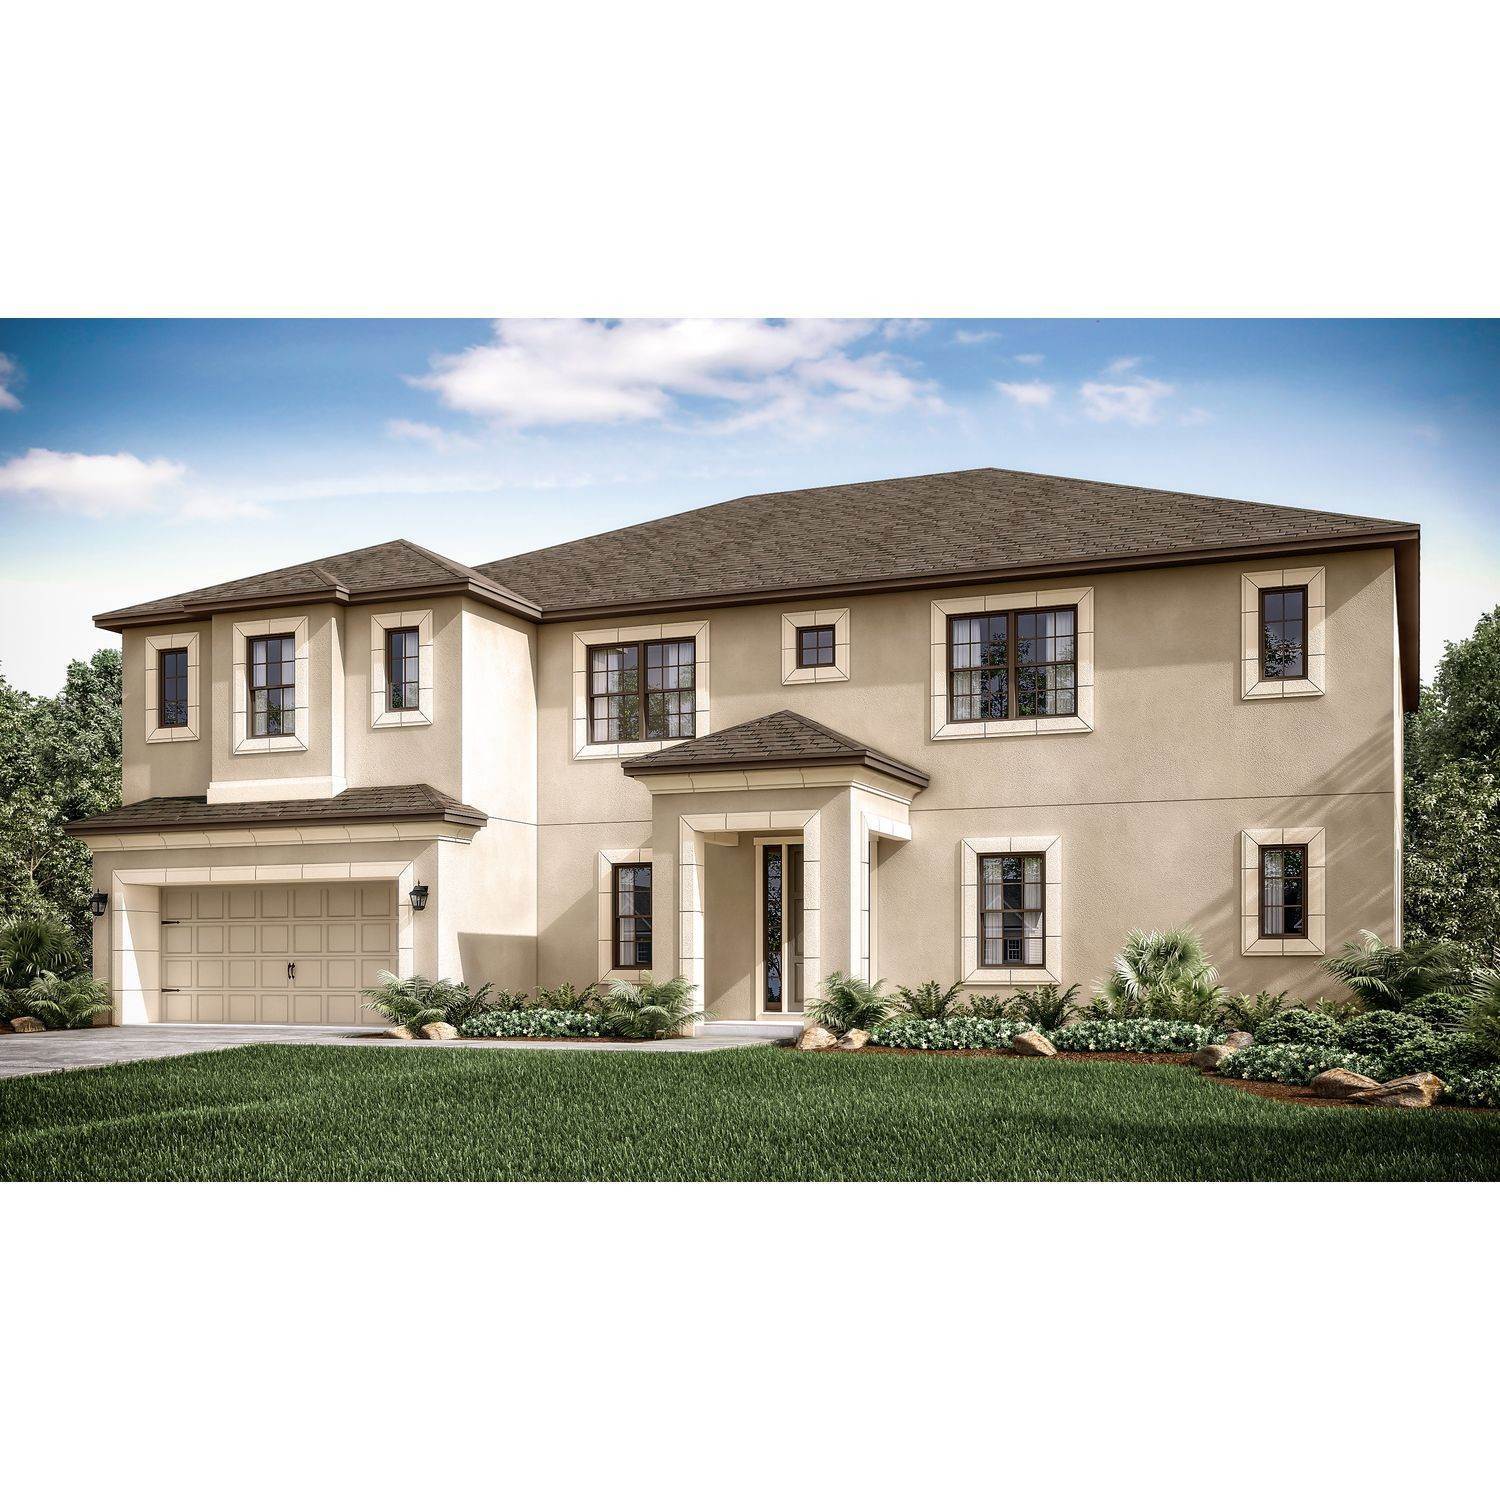 Single Family for Sale at Park East At Azario - Tradewinds 16123 Culpepper Dr. LAKEWOOD RANCH, FLORIDA 34211 UNITED STATES